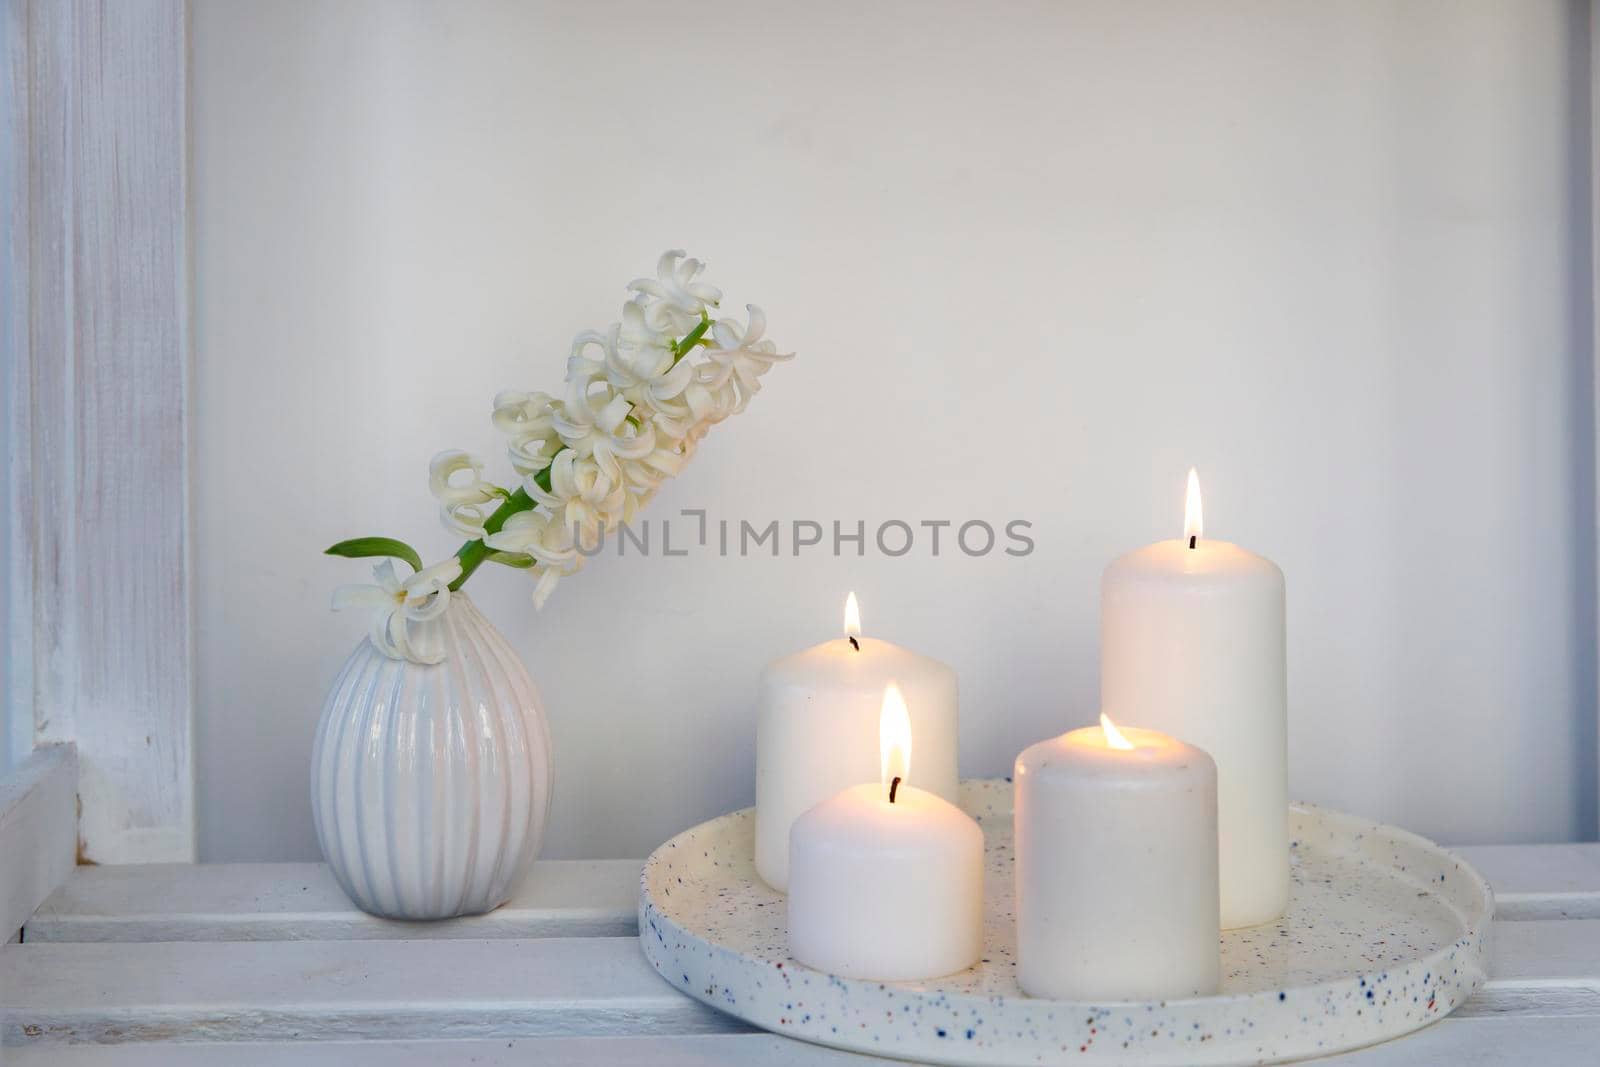 A white hyacinth in a 1970s fluted vase next to a tray of four lit candles is on the shelf. Minimalism. Scandinavian style.